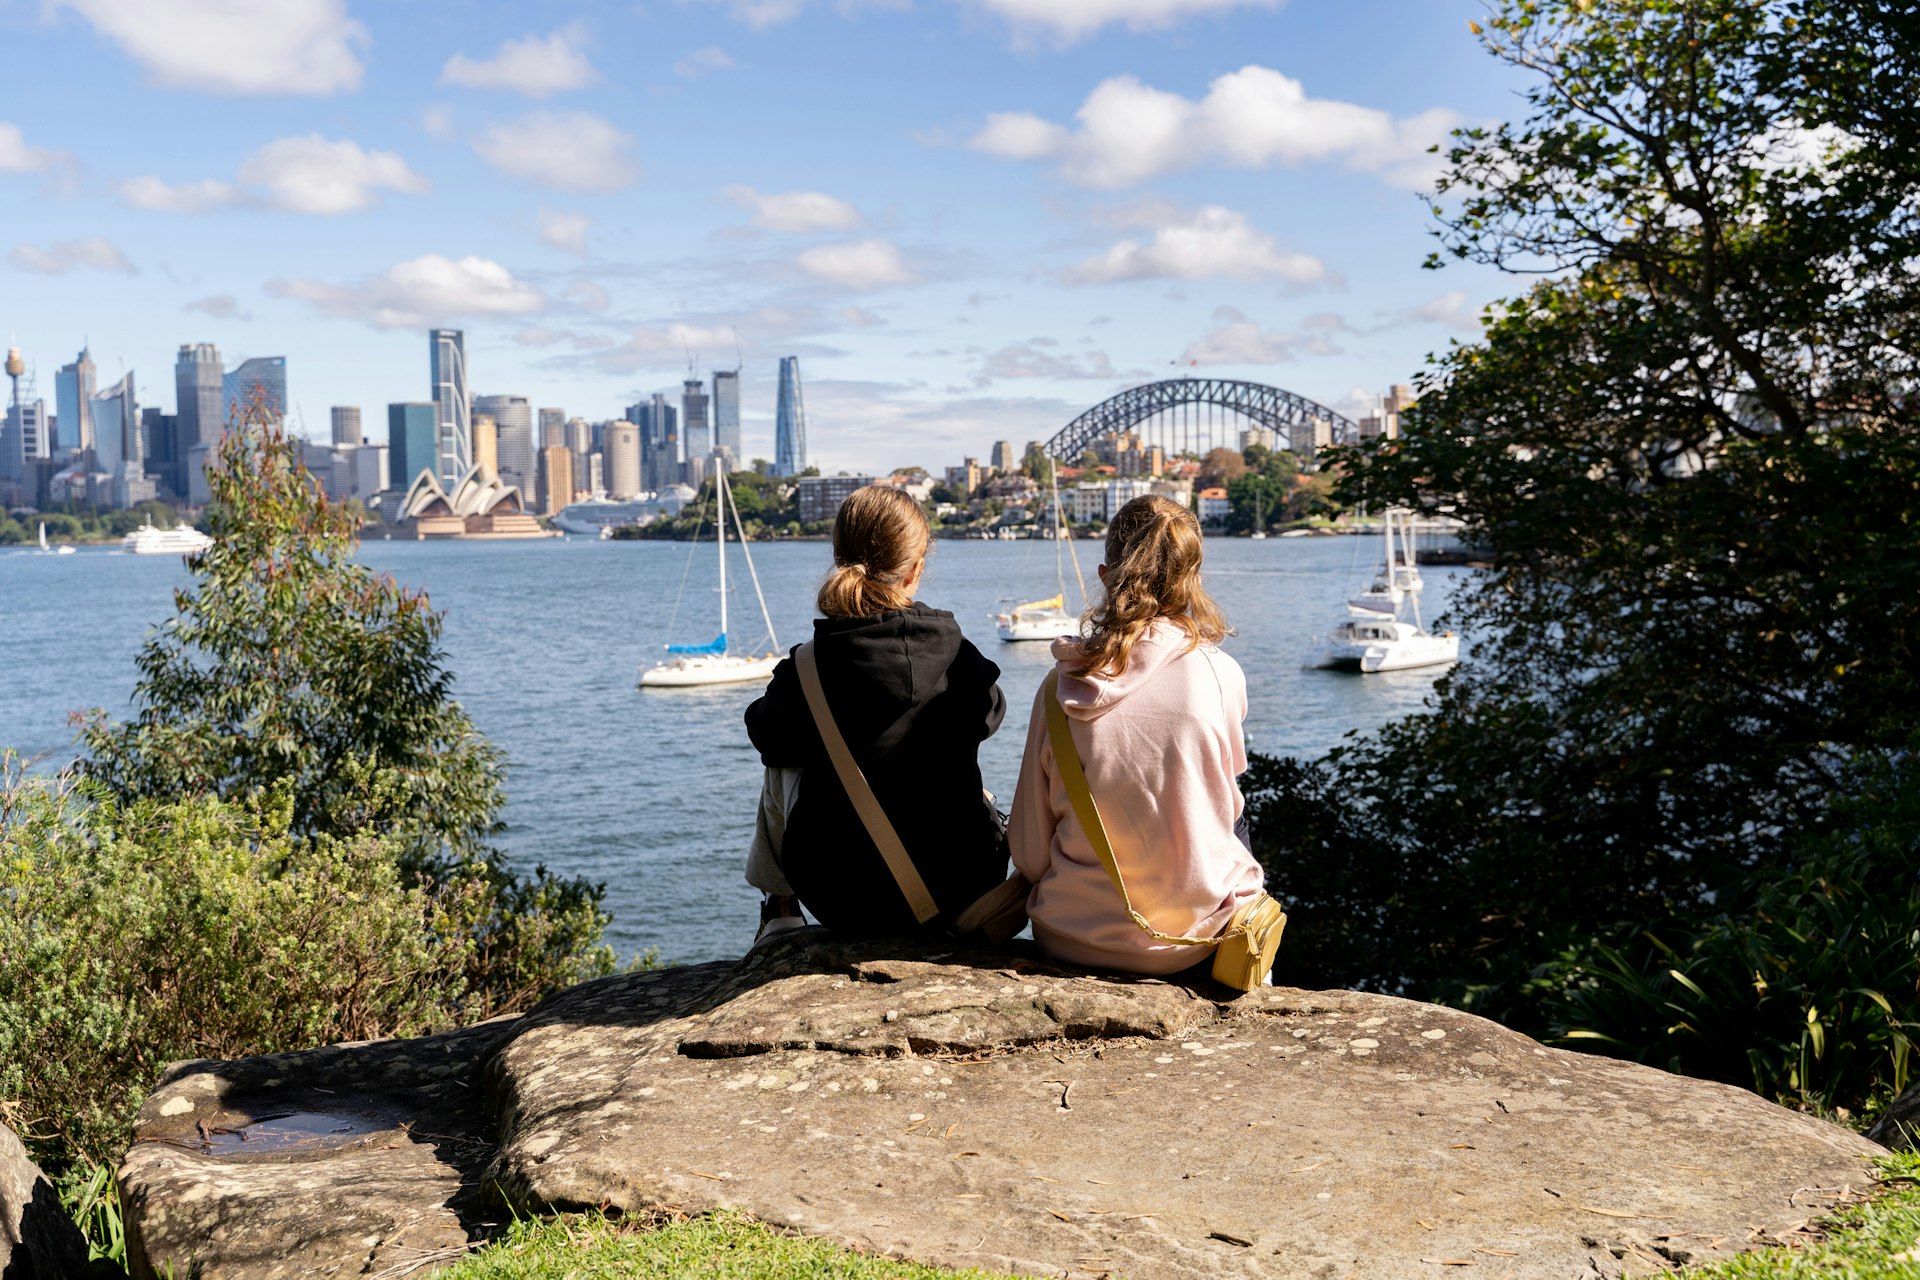 Two girls sit on a rock and look out over an iconic harbor, with a white opera house and a large bridge